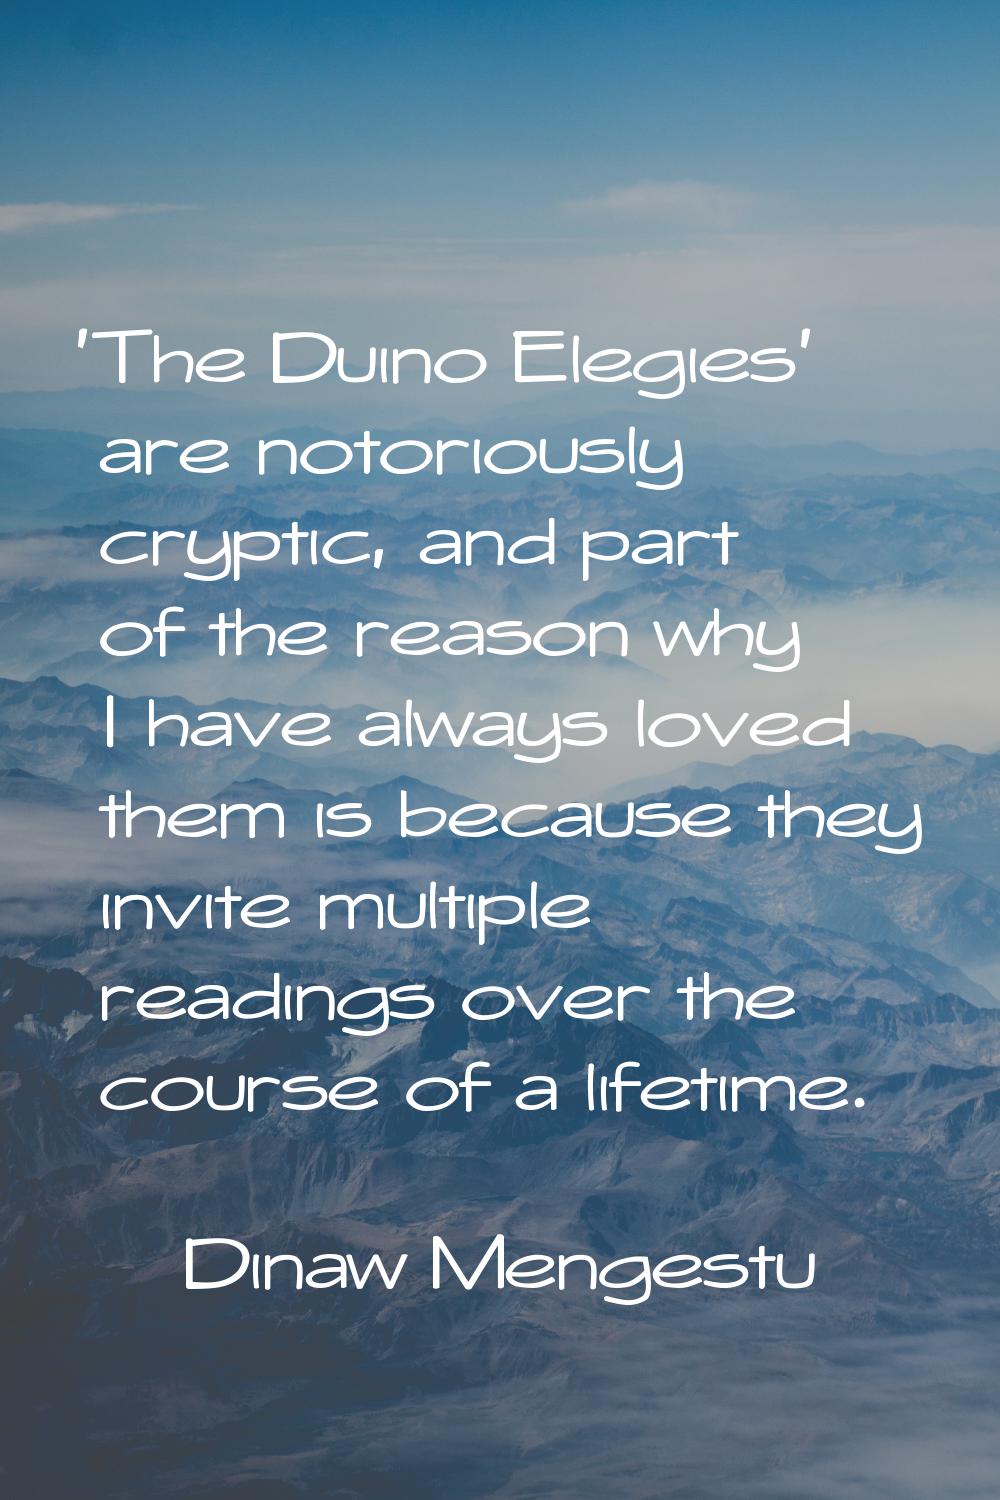 'The Duino Elegies' are notoriously cryptic, and part of the reason why I have always loved them is